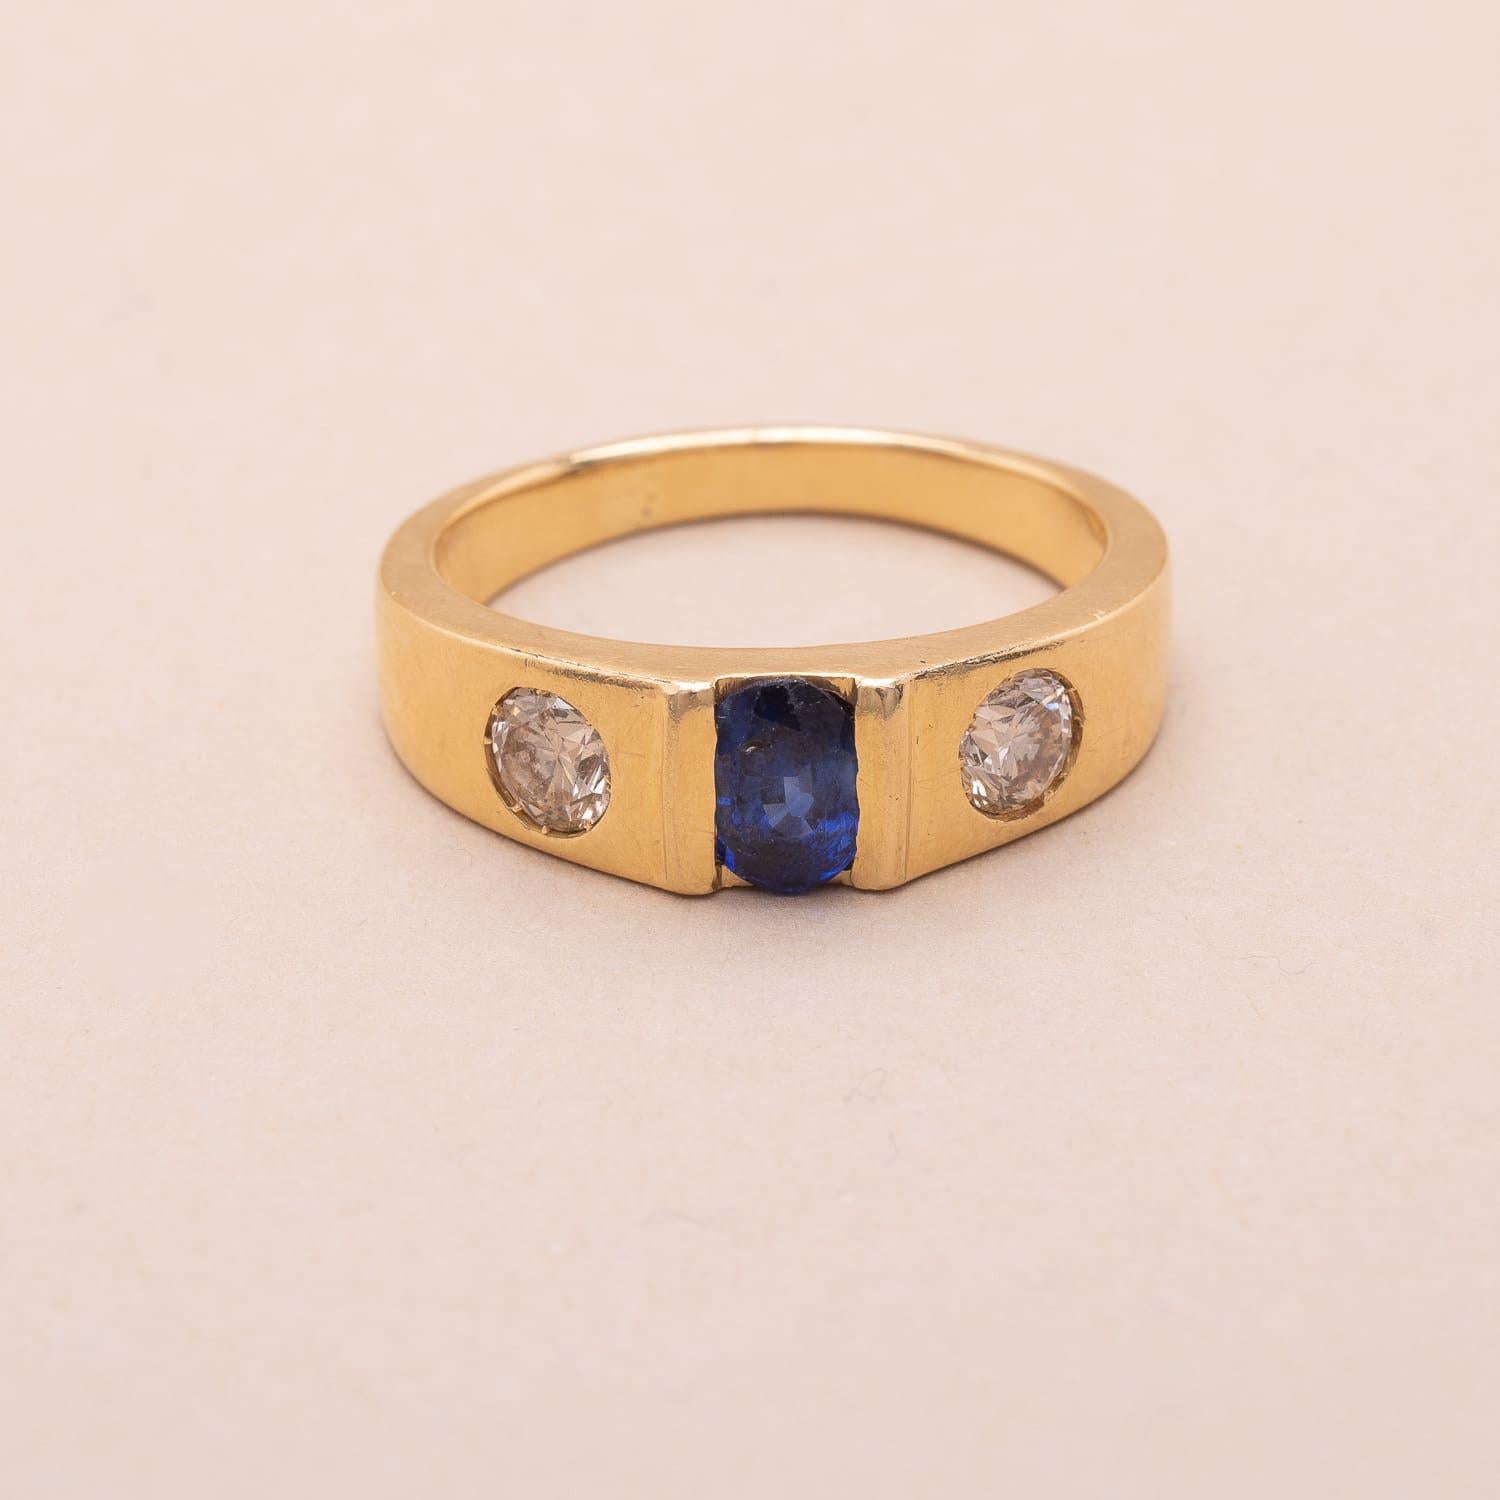 18K gold three-stone ring set with an oval-cut sapphire surrounded by two brilliant-cut diamonds 

Sapphire's estimated weight : 0.60 carat 
Diamonds' estimated weight : 0.66 carat total

Estimated diamonds characteristics : Color GH, Purity